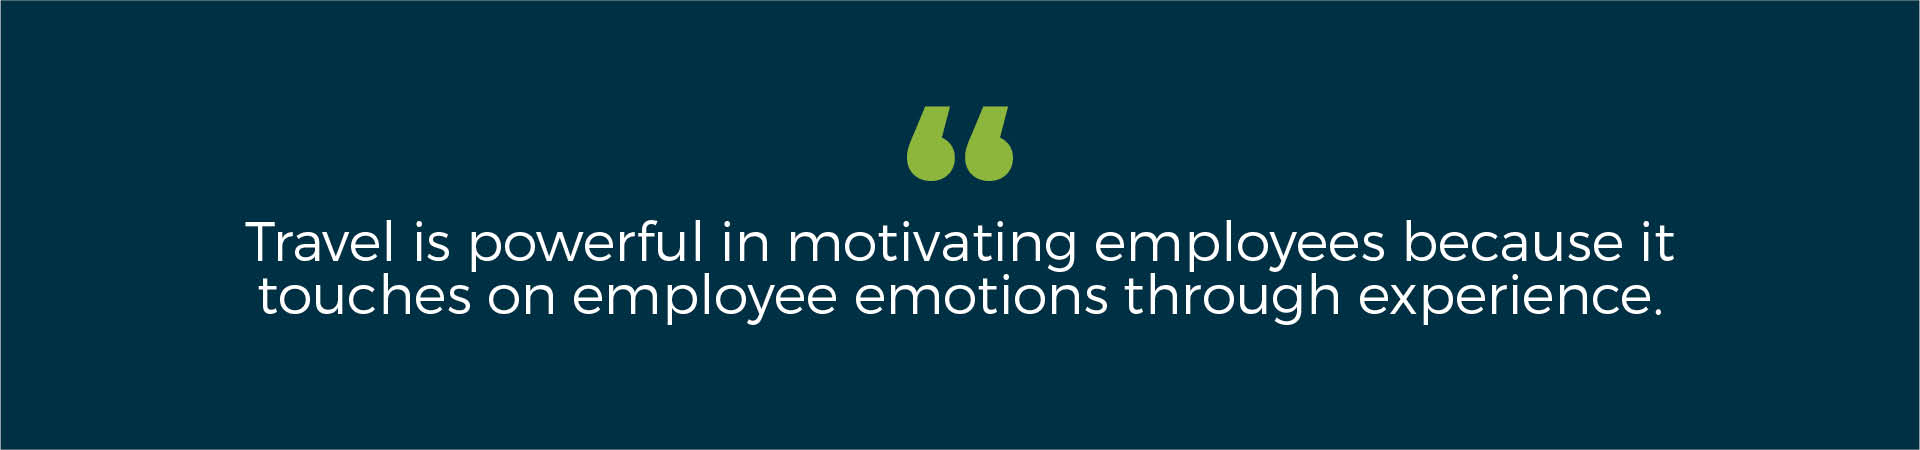 Travel is powerful in motivating employees because it touches on employee emotions through experience.